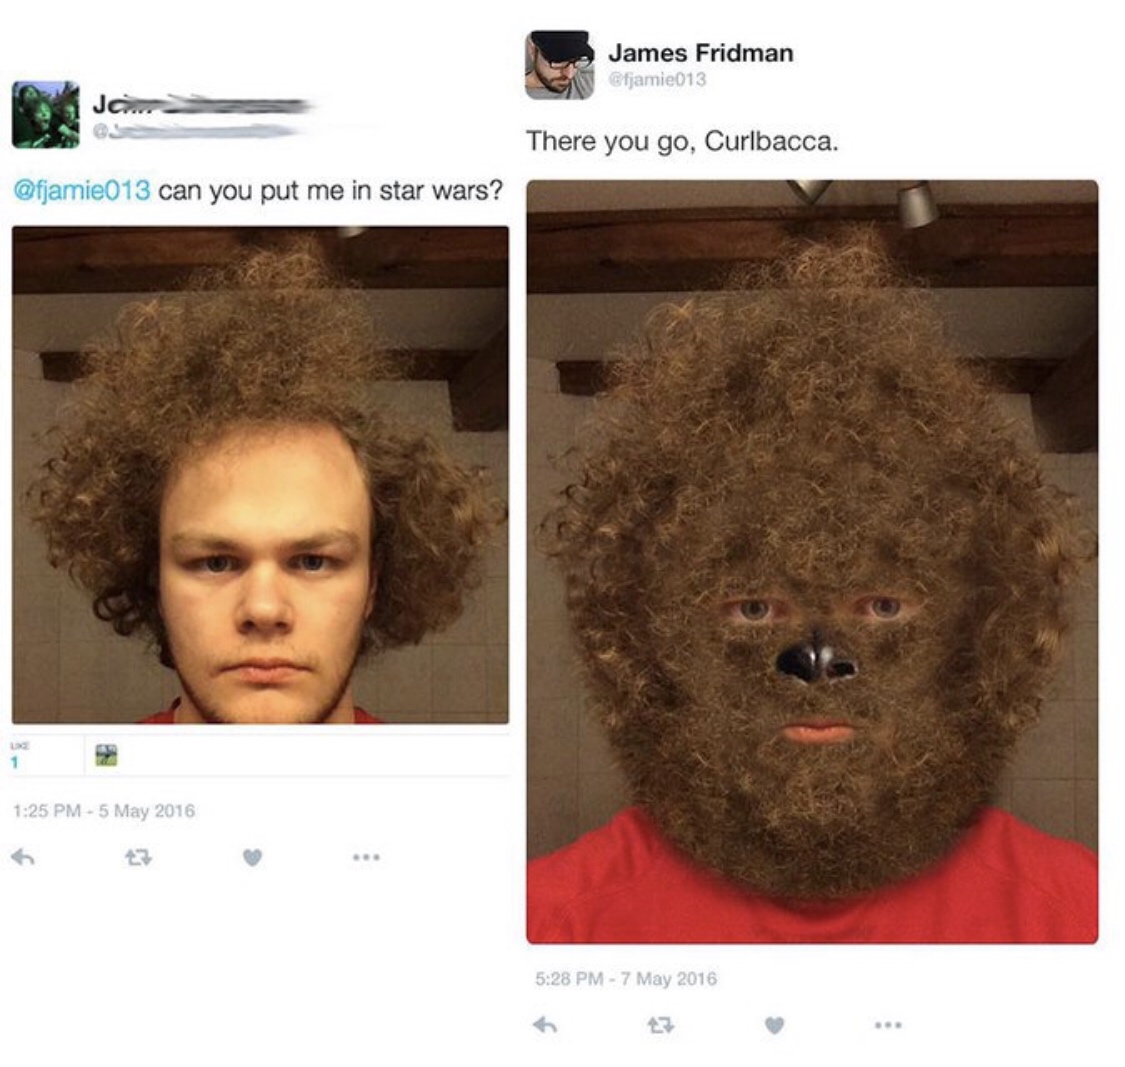 james fridman best - James Fridman Gfjamie013 Jahr There you go, Curlbacca. can you put me in star wars?